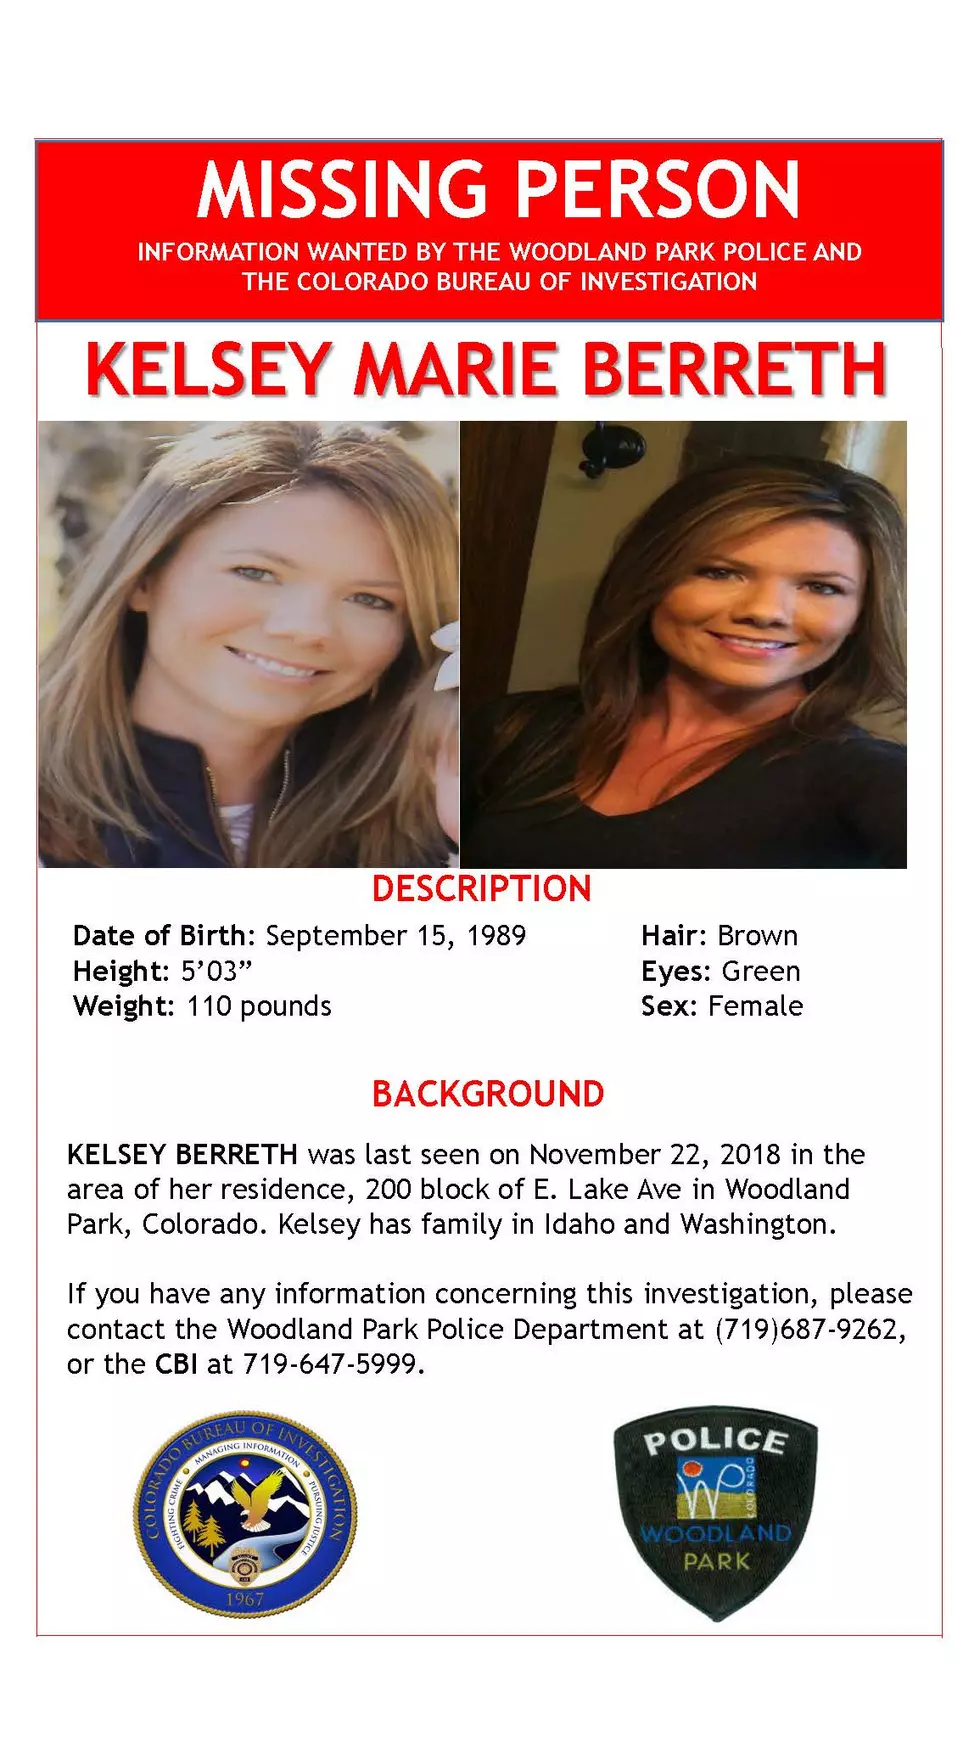 Landfill search for missing Colorado mom’s remains ends